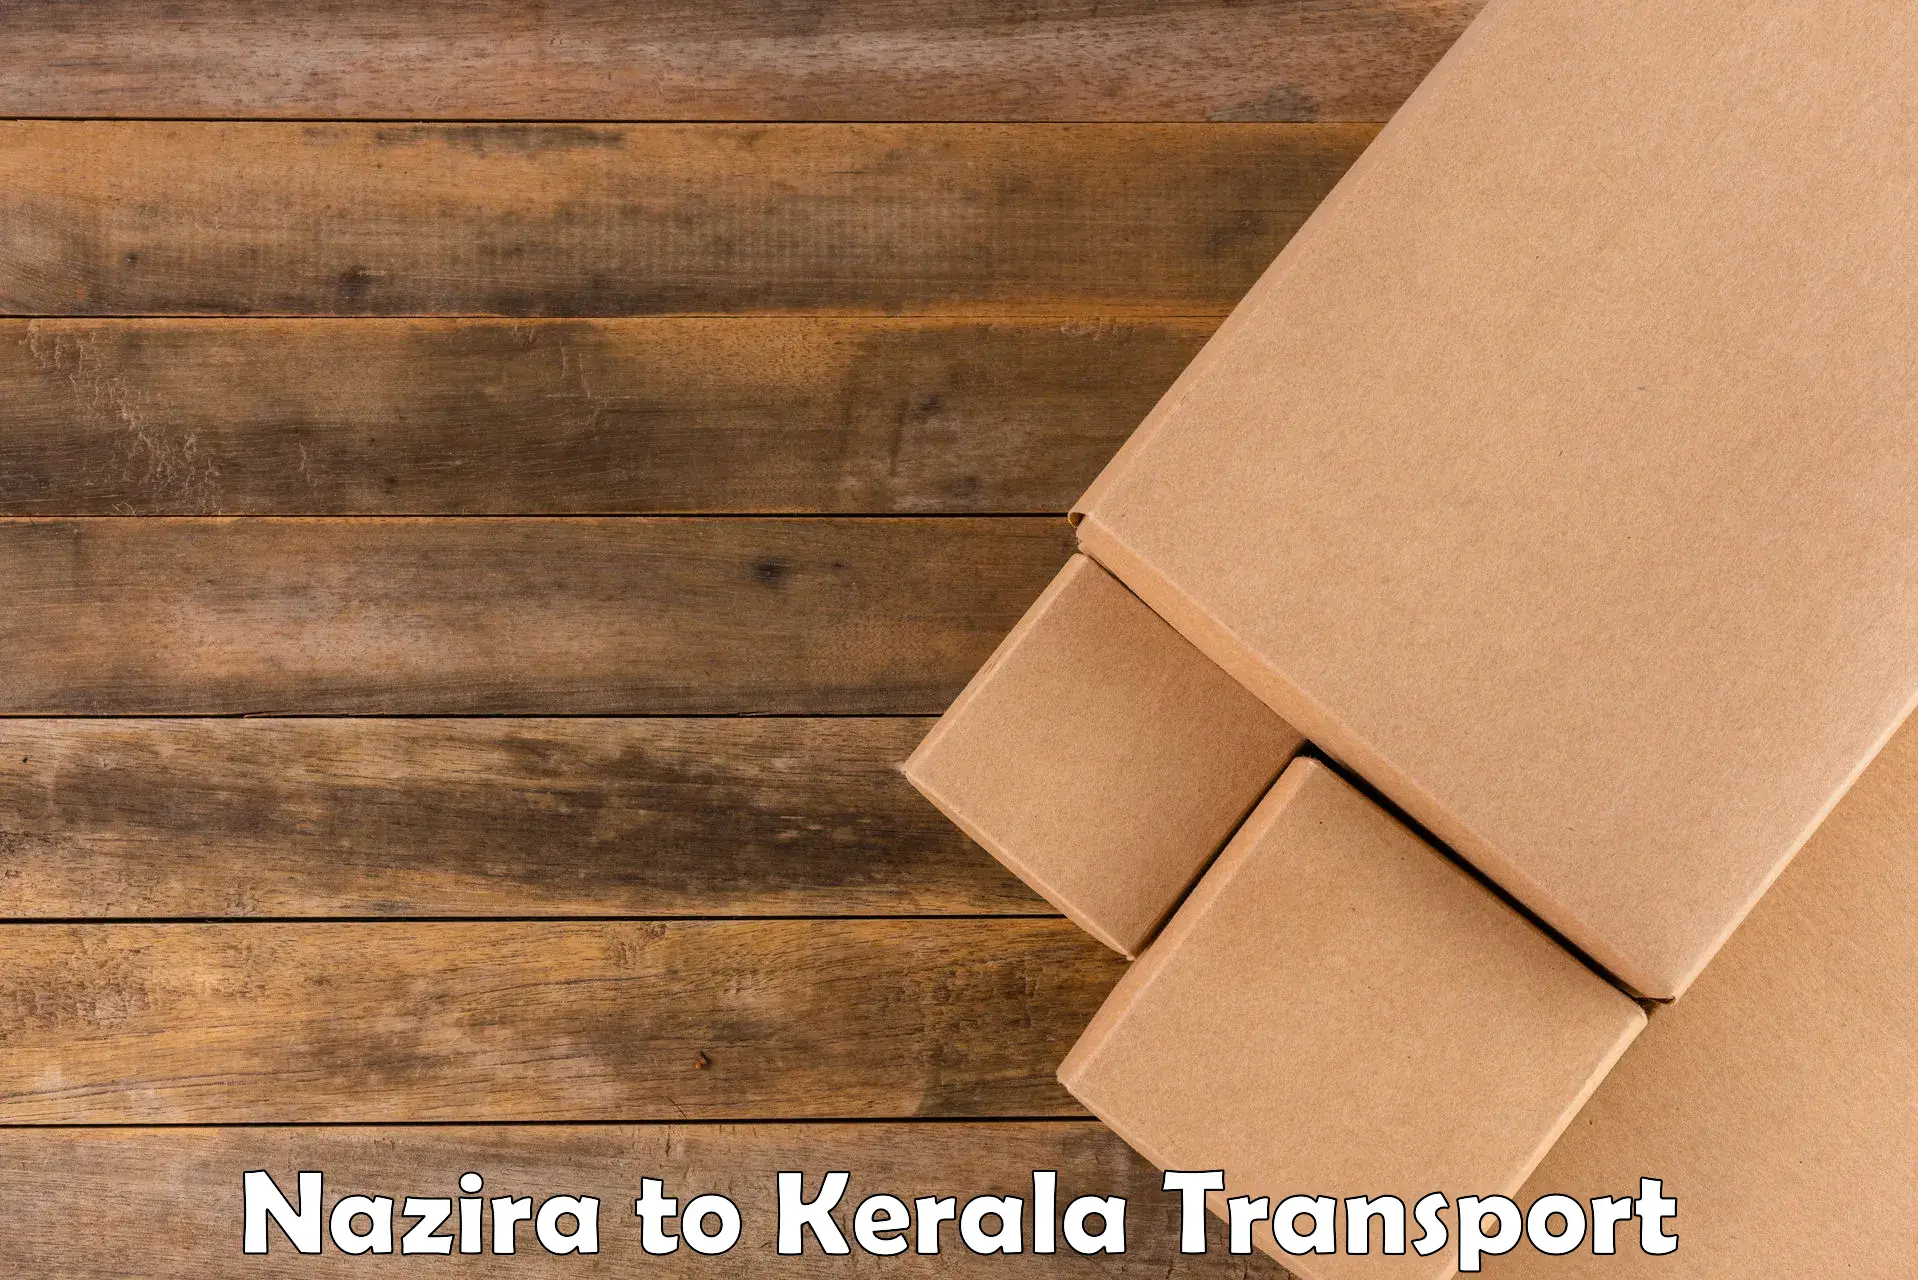 Transport bike from one state to another Nazira to Kerala